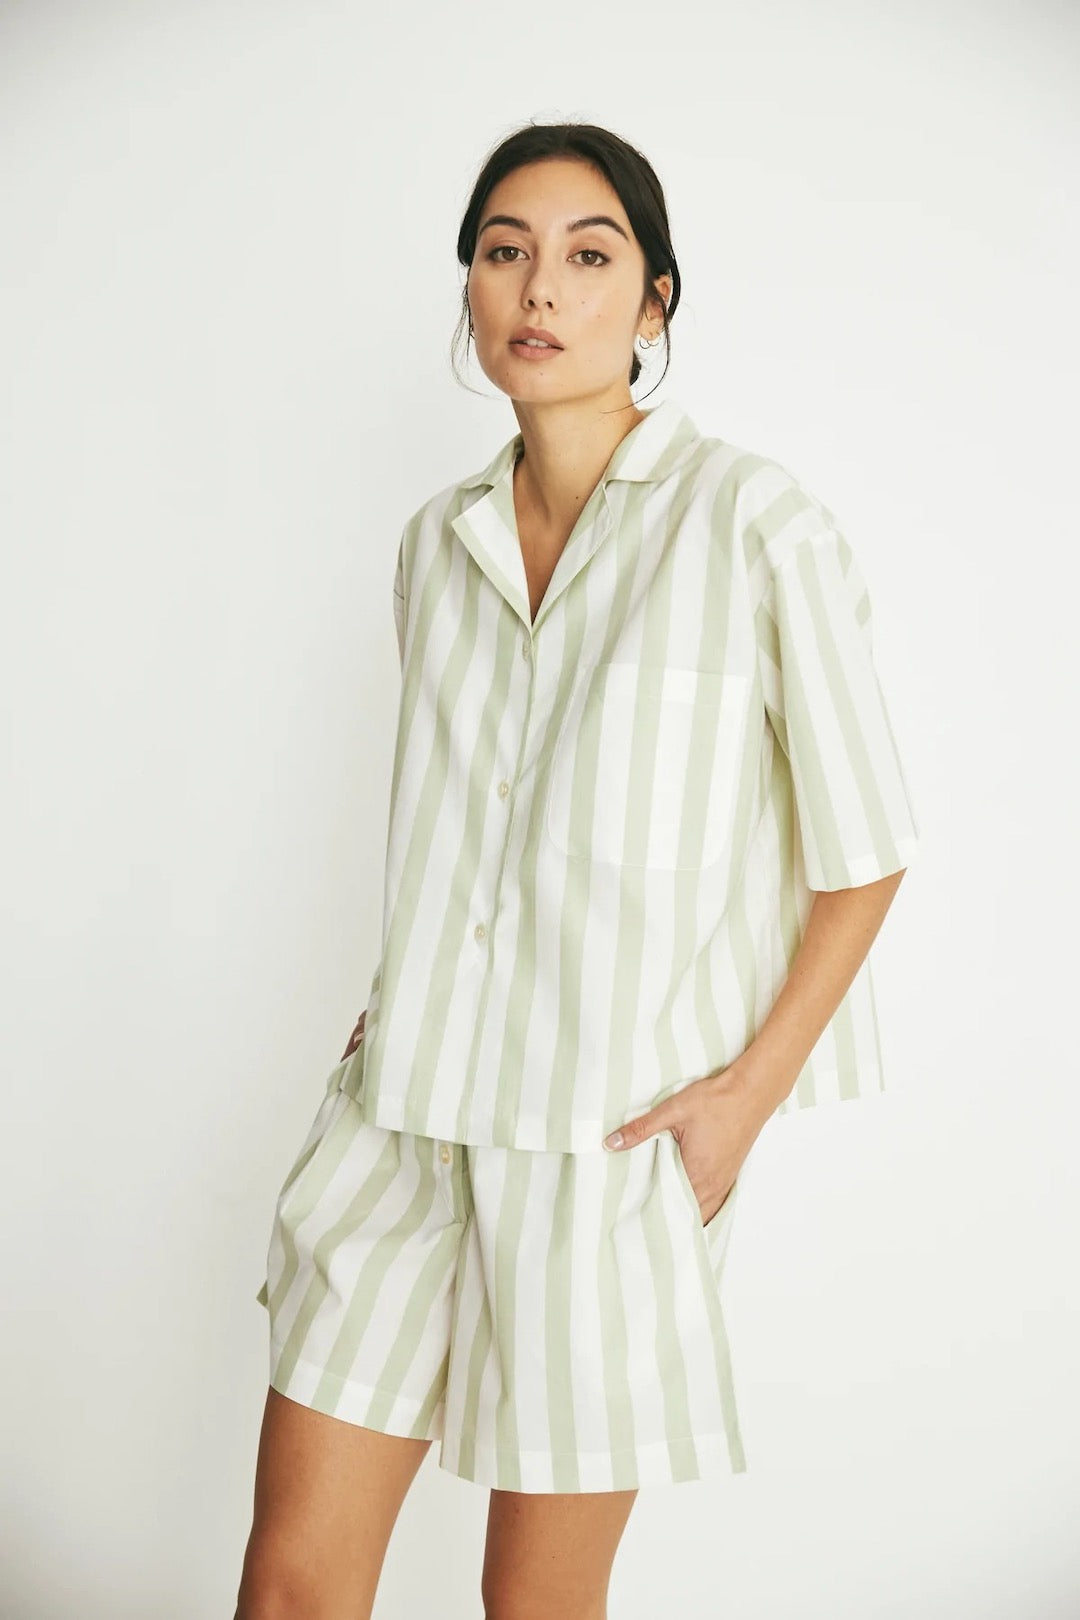 The model is wearing a Camilla Set - Pear Stripe pajama set by general sleep.